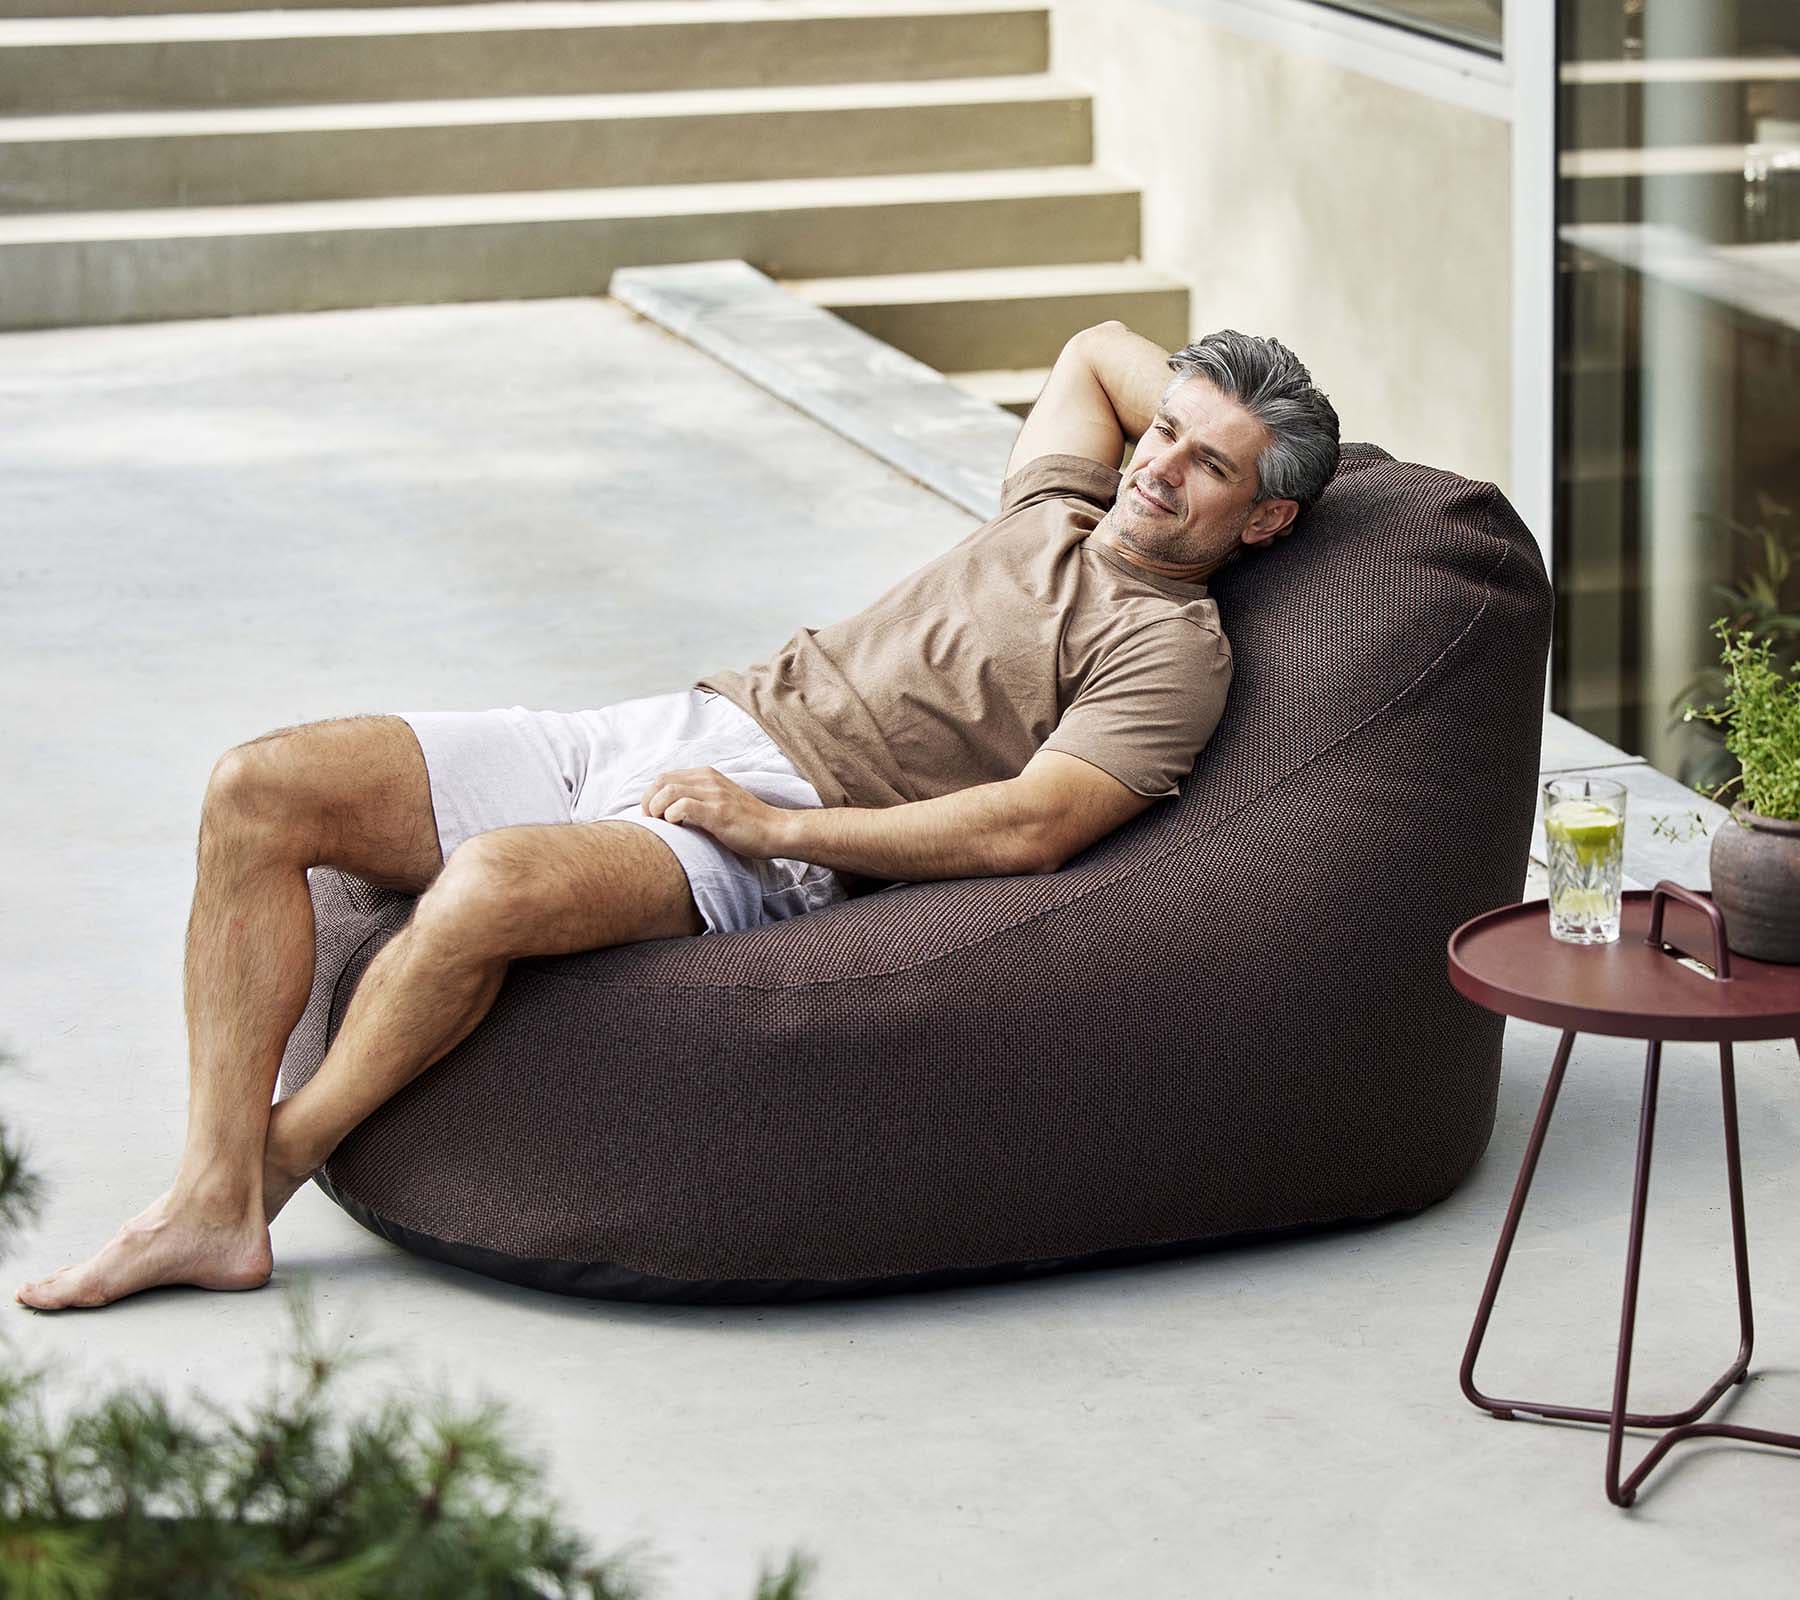 Boxhill's Cozy Outdoor Bean Bag Chair Dark Bordeaux lifestyle image with a man lying down